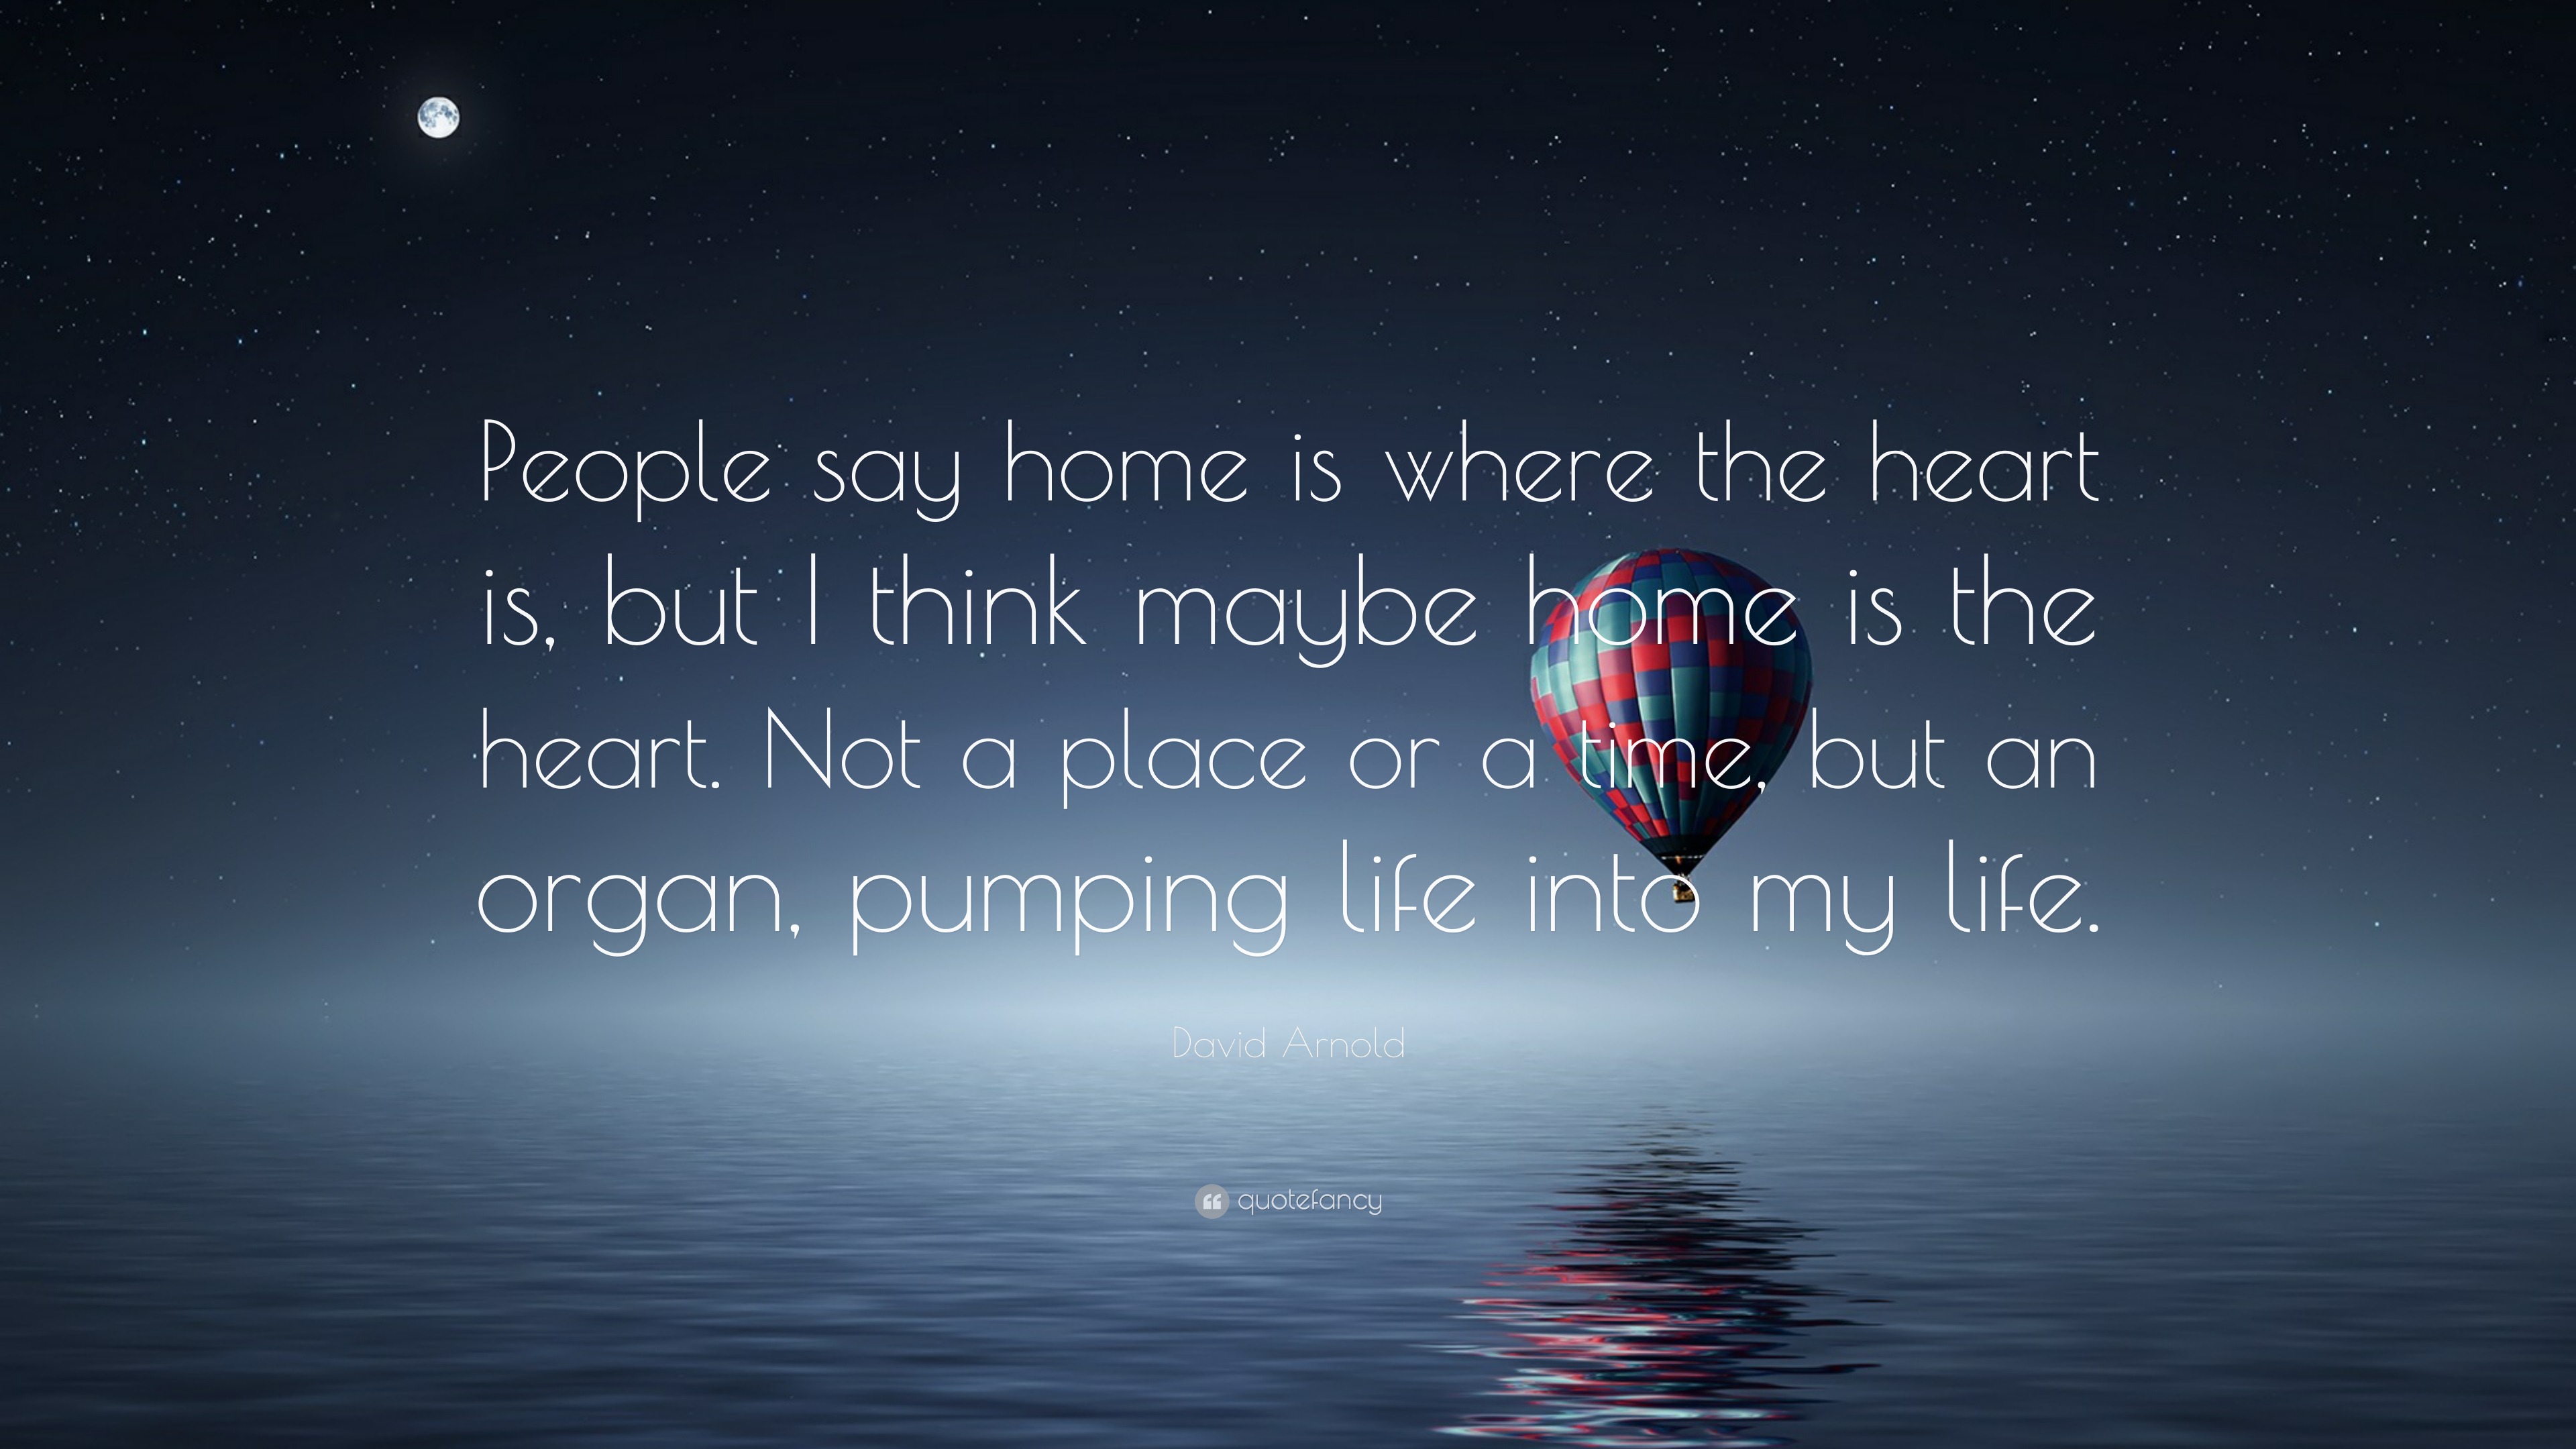 https://quotefancy.com/media/wallpaper/3840x2160/7576773-David-Arnold-Quote-People-say-home-is-where-the-heart-is-but-I.jpg